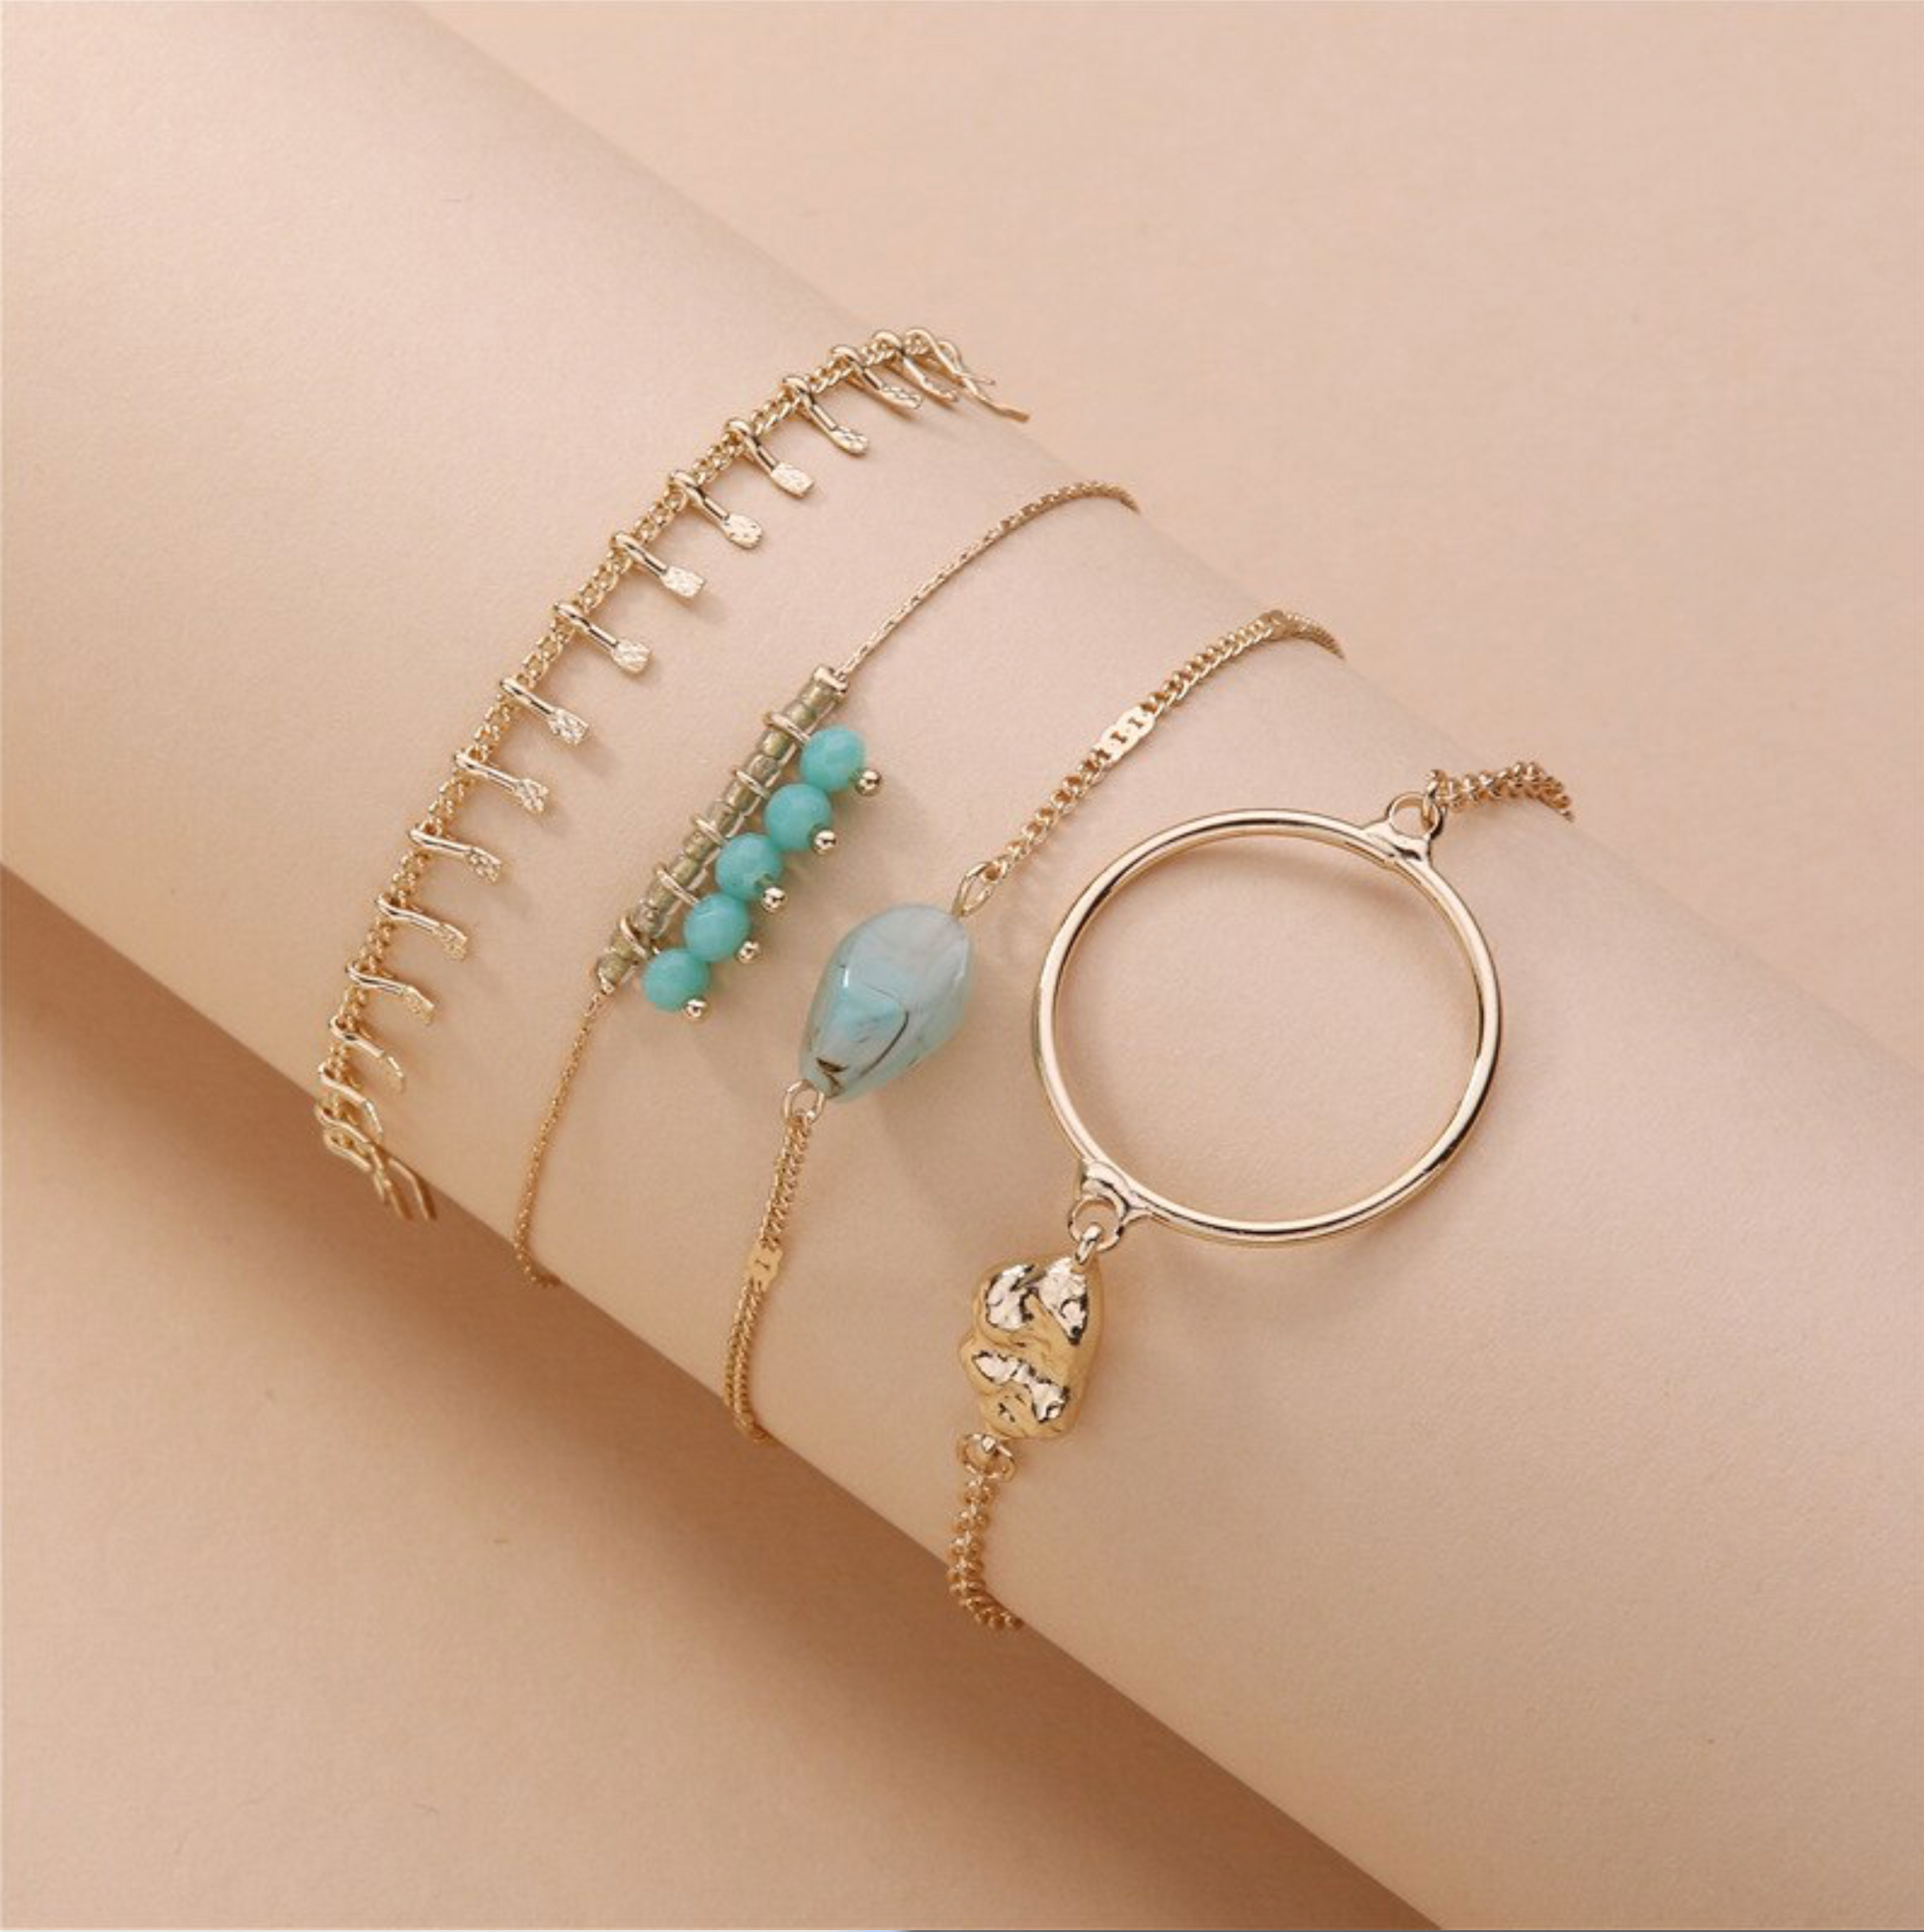 Set Of 4 Dainty Goldtone Bracelet With Teal Beads And Natural Stone